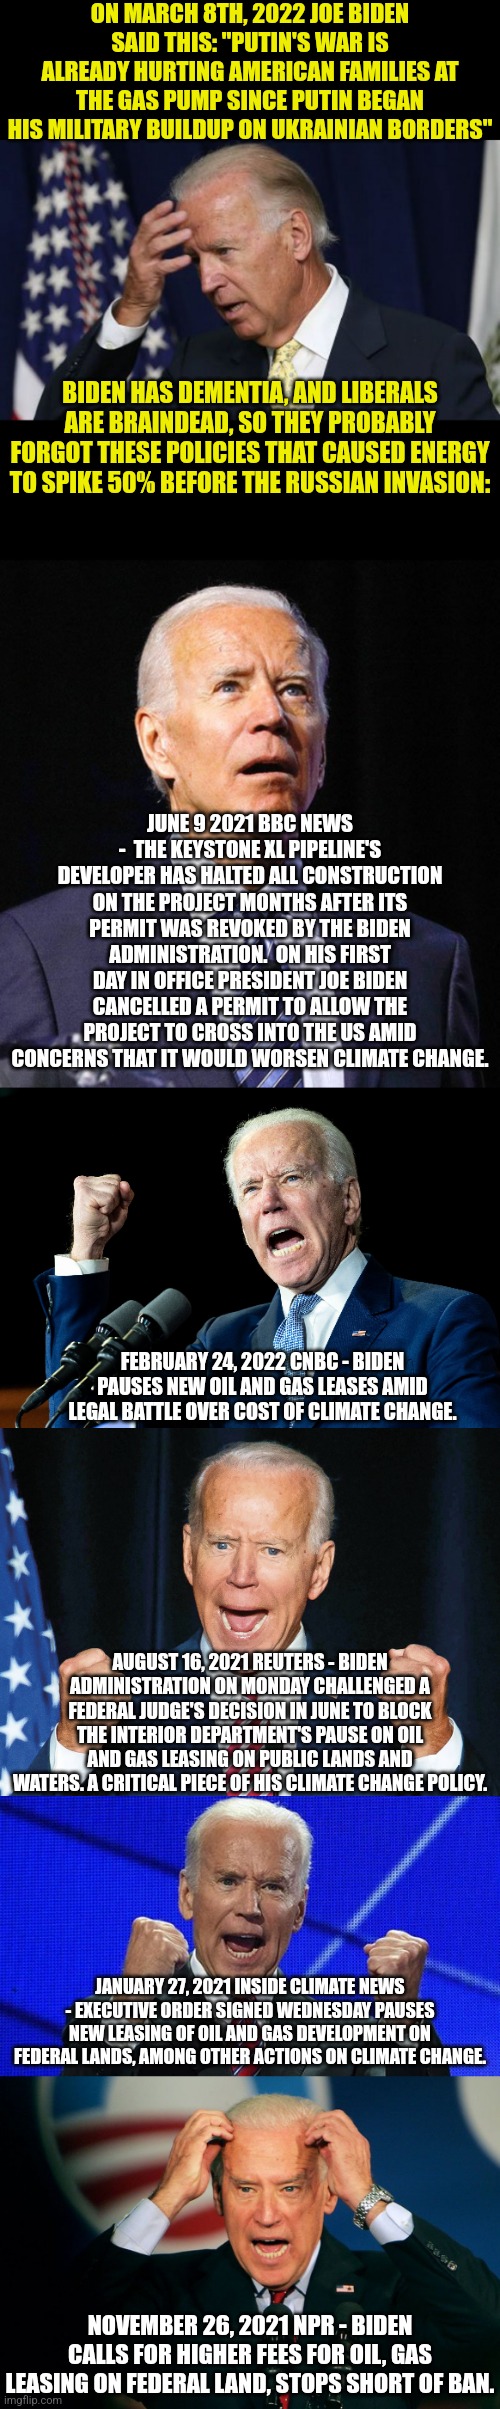 Yep clearly Russia is to blame for $4+ national gas prices? Biden has done nothing to make the situation worse? Lying liberals! |  ON MARCH 8TH, 2022 JOE BIDEN SAID THIS: "PUTIN'S WAR IS ALREADY HURTING AMERICAN FAMILIES AT THE GAS PUMP SINCE PUTIN BEGAN HIS MILITARY BUILDUP ON UKRAINIAN BORDERS"; BIDEN HAS DEMENTIA, AND LIBERALS ARE BRAINDEAD, SO THEY PROBABLY FORGOT THESE POLICIES THAT CAUSED ENERGY TO SPIKE 50% BEFORE THE RUSSIAN INVASION:; JUNE 9 2021 BBC NEWS -  THE KEYSTONE XL PIPELINE'S DEVELOPER HAS HALTED ALL CONSTRUCTION ON THE PROJECT MONTHS AFTER ITS PERMIT WAS REVOKED BY THE BIDEN ADMINISTRATION.  ON HIS FIRST DAY IN OFFICE PRESIDENT JOE BIDEN CANCELLED A PERMIT TO ALLOW THE PROJECT TO CROSS INTO THE US AMID CONCERNS THAT IT WOULD WORSEN CLIMATE CHANGE. FEBRUARY 24, 2022 CNBC - BIDEN PAUSES NEW OIL AND GAS LEASES AMID LEGAL BATTLE OVER COST OF CLIMATE CHANGE. AUGUST 16, 2021 REUTERS - BIDEN ADMINISTRATION ON MONDAY CHALLENGED A FEDERAL JUDGE'S DECISION IN JUNE TO BLOCK THE INTERIOR DEPARTMENT'S PAUSE ON OIL AND GAS LEASING ON PUBLIC LANDS AND WATERS. A CRITICAL PIECE OF HIS CLIMATE CHANGE POLICY. JANUARY 27, 2021 INSIDE CLIMATE NEWS - EXECUTIVE ORDER SIGNED WEDNESDAY PAUSES NEW LEASING OF OIL AND GAS DEVELOPMENT ON FEDERAL LANDS, AMONG OTHER ACTIONS ON CLIMATE CHANGE. NOVEMBER 26, 2021 NPR - BIDEN CALLS FOR HIGHER FEES FOR OIL, GAS LEASING ON FEDERAL LAND, STOPS SHORT OF BAN. | image tagged in joe biden worries,crazy joe biden,oil,energy,liberal hypocrisy,stupid liberals | made w/ Imgflip meme maker